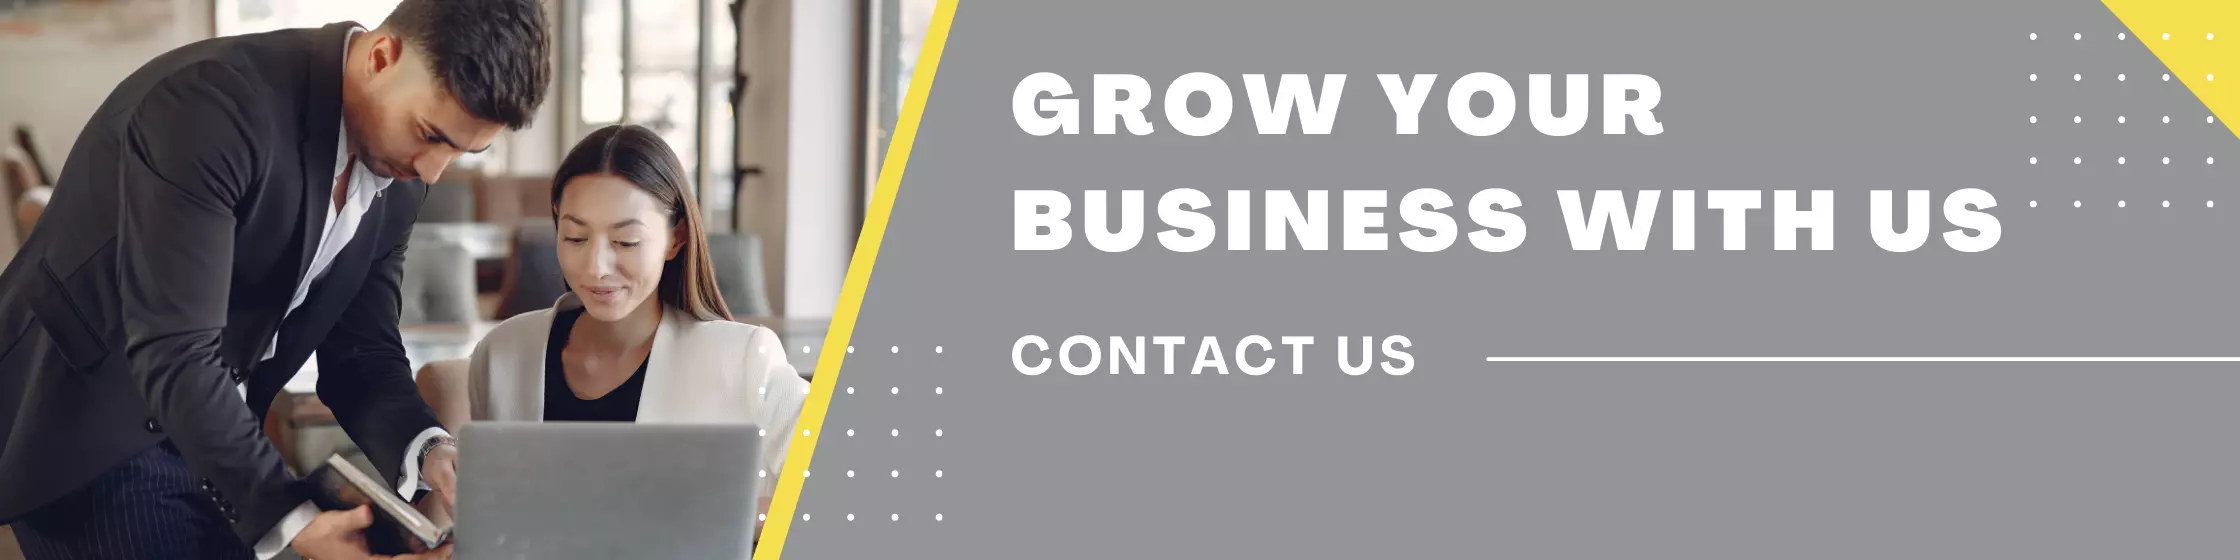 Contact Us Grow Your Business With Us